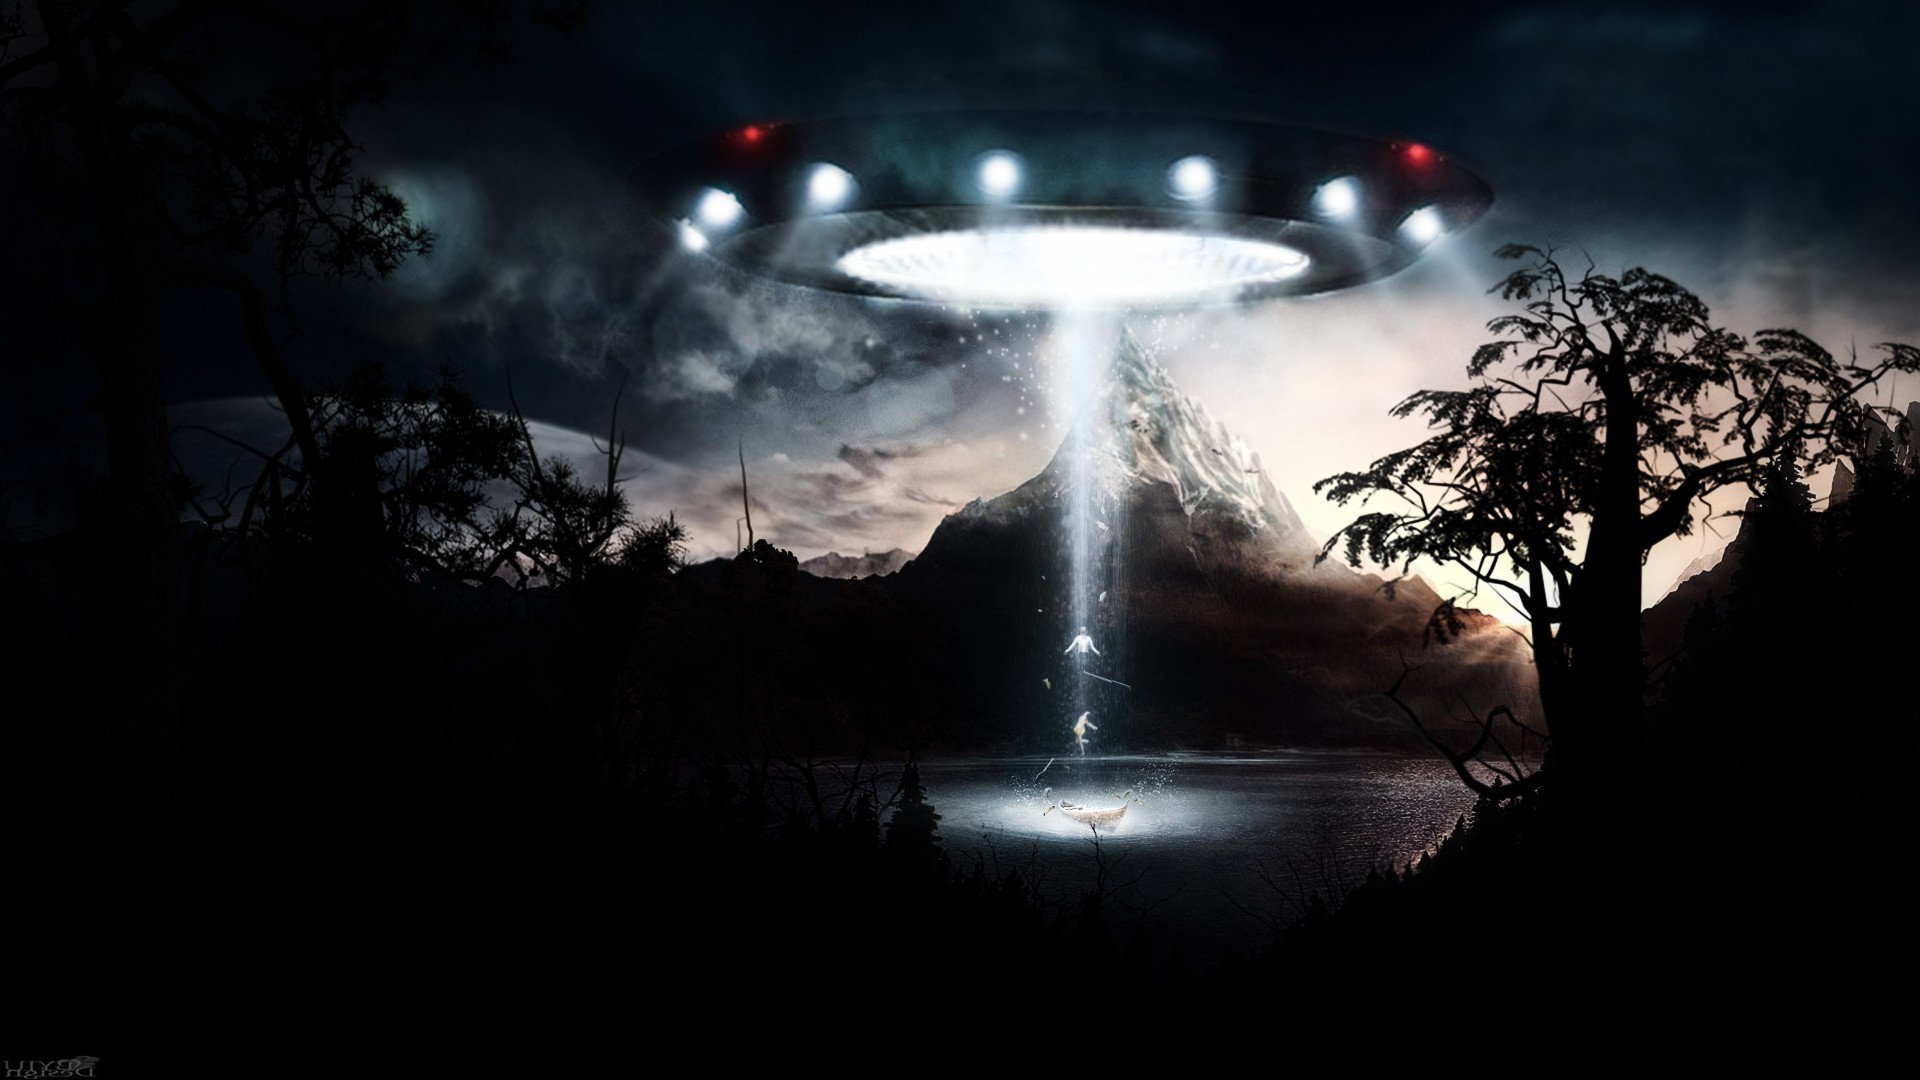 Ufo Iphone Wallpaper - Ufo Wallpaper Iphone - New Wallpapers : Download hd wallpapers for free.